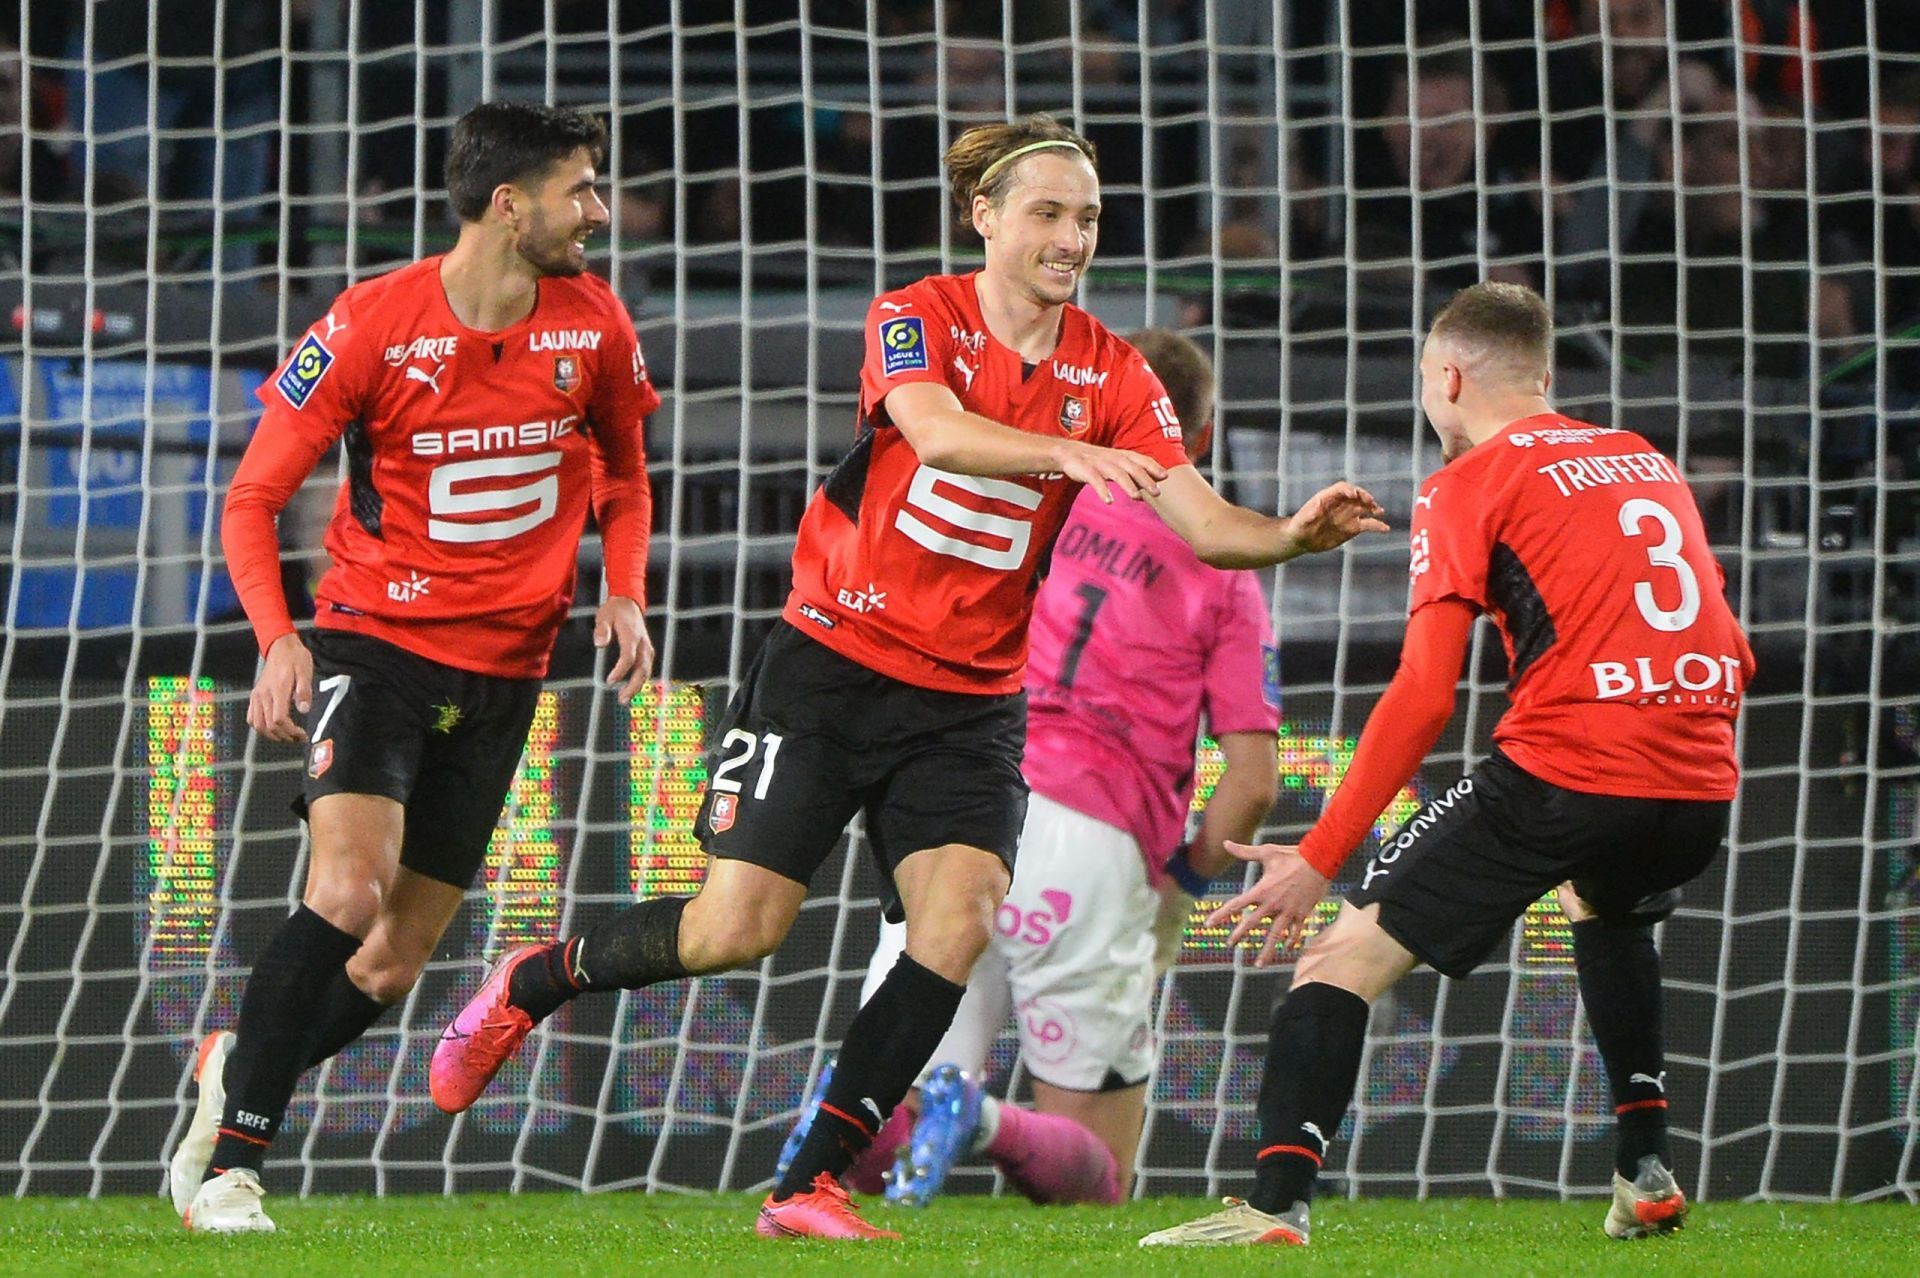 Can Rennes condemn Metz to more misery this weekend?